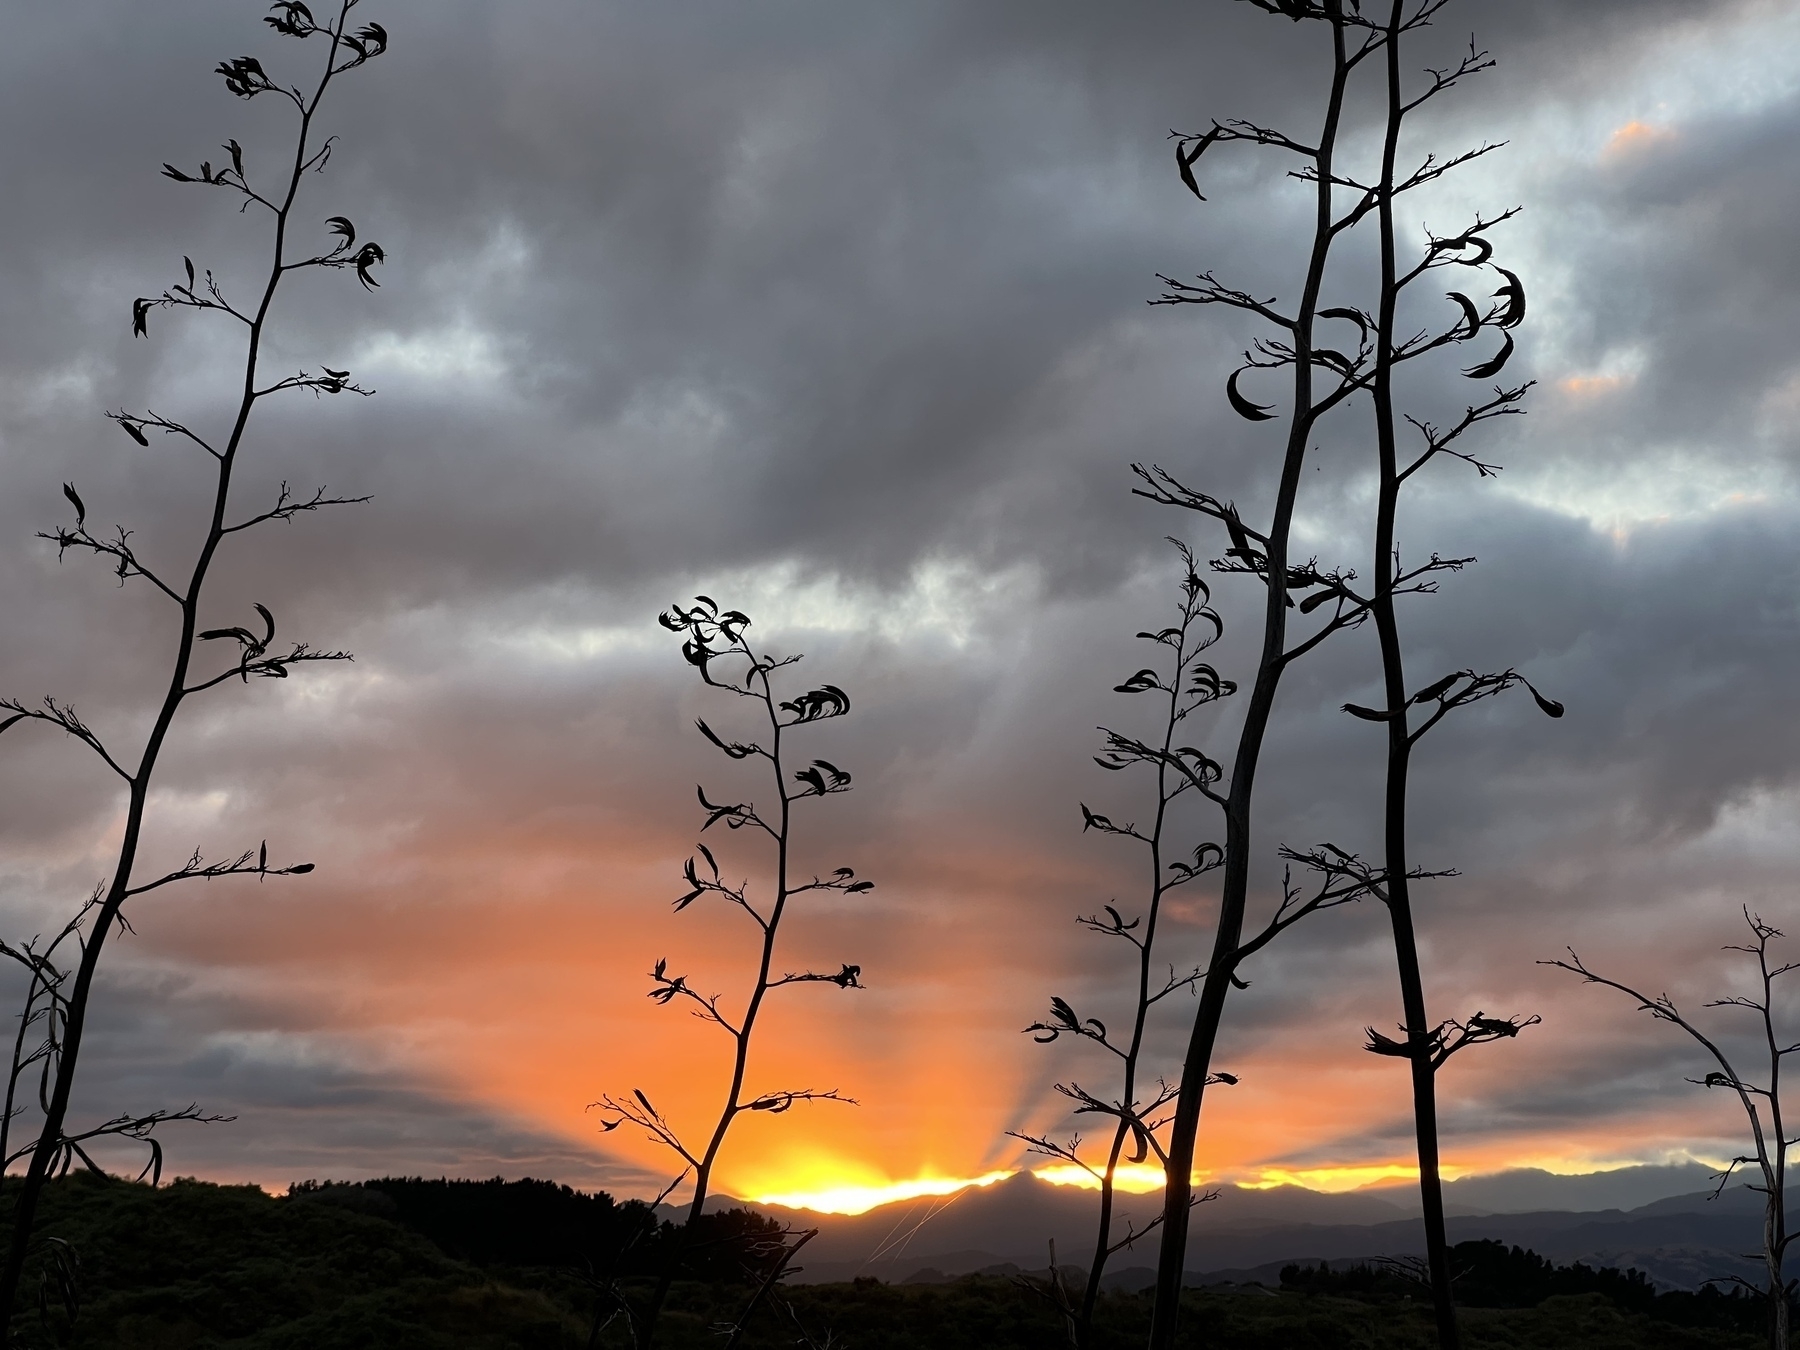 Orange clouds with rays of sun, flax spears in the foreground. 